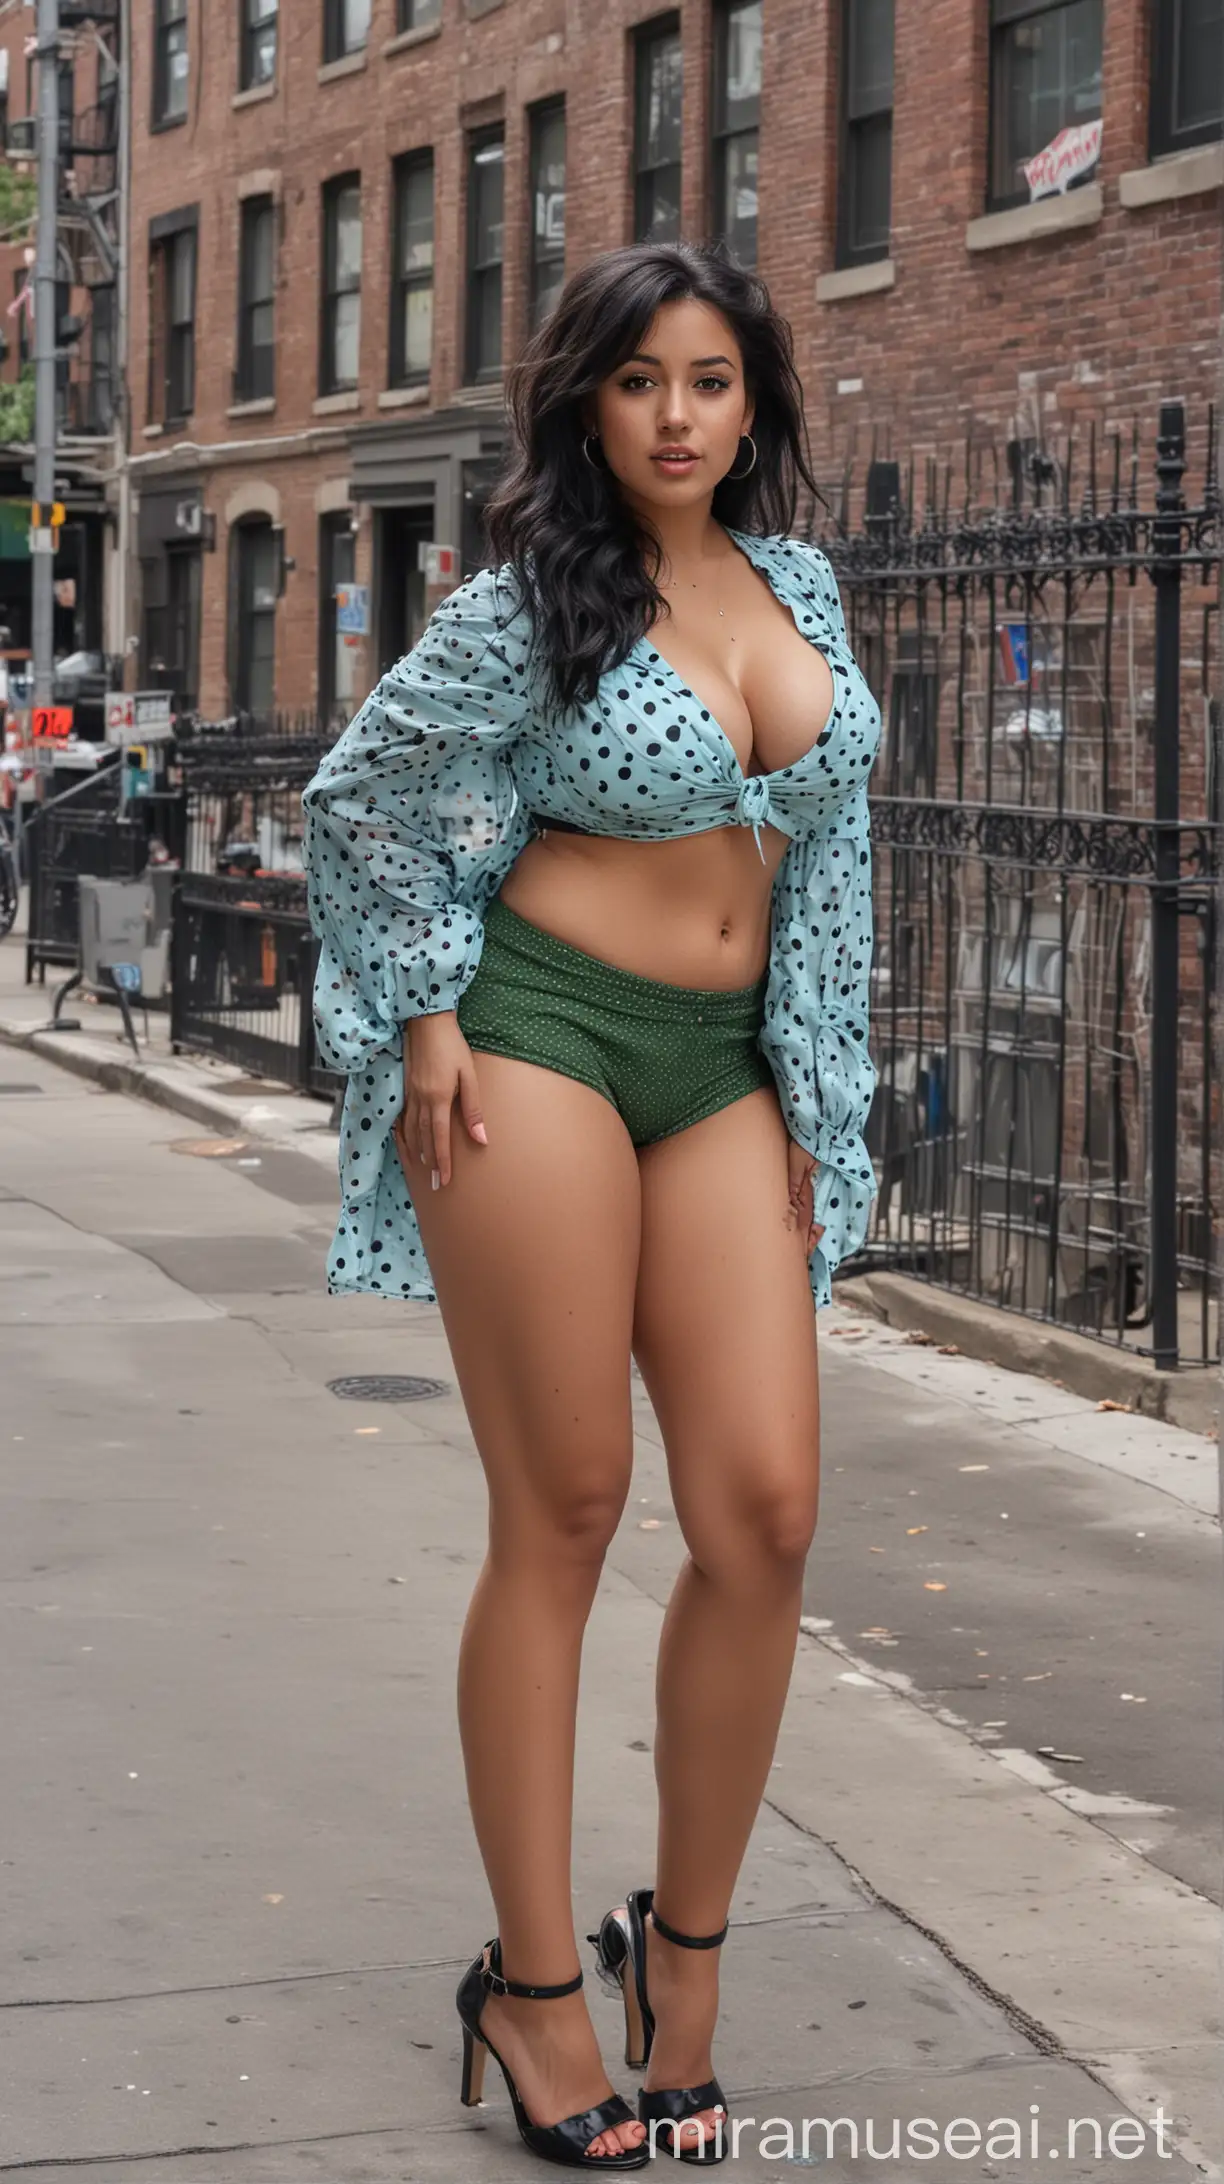 4k Ai art sit down girl view beautiful USA girl black hair nose ring ear tops high heels brown mini shorts and blue black dots shirt and green bra big tits big booty in usa new york city on the street cutout front view